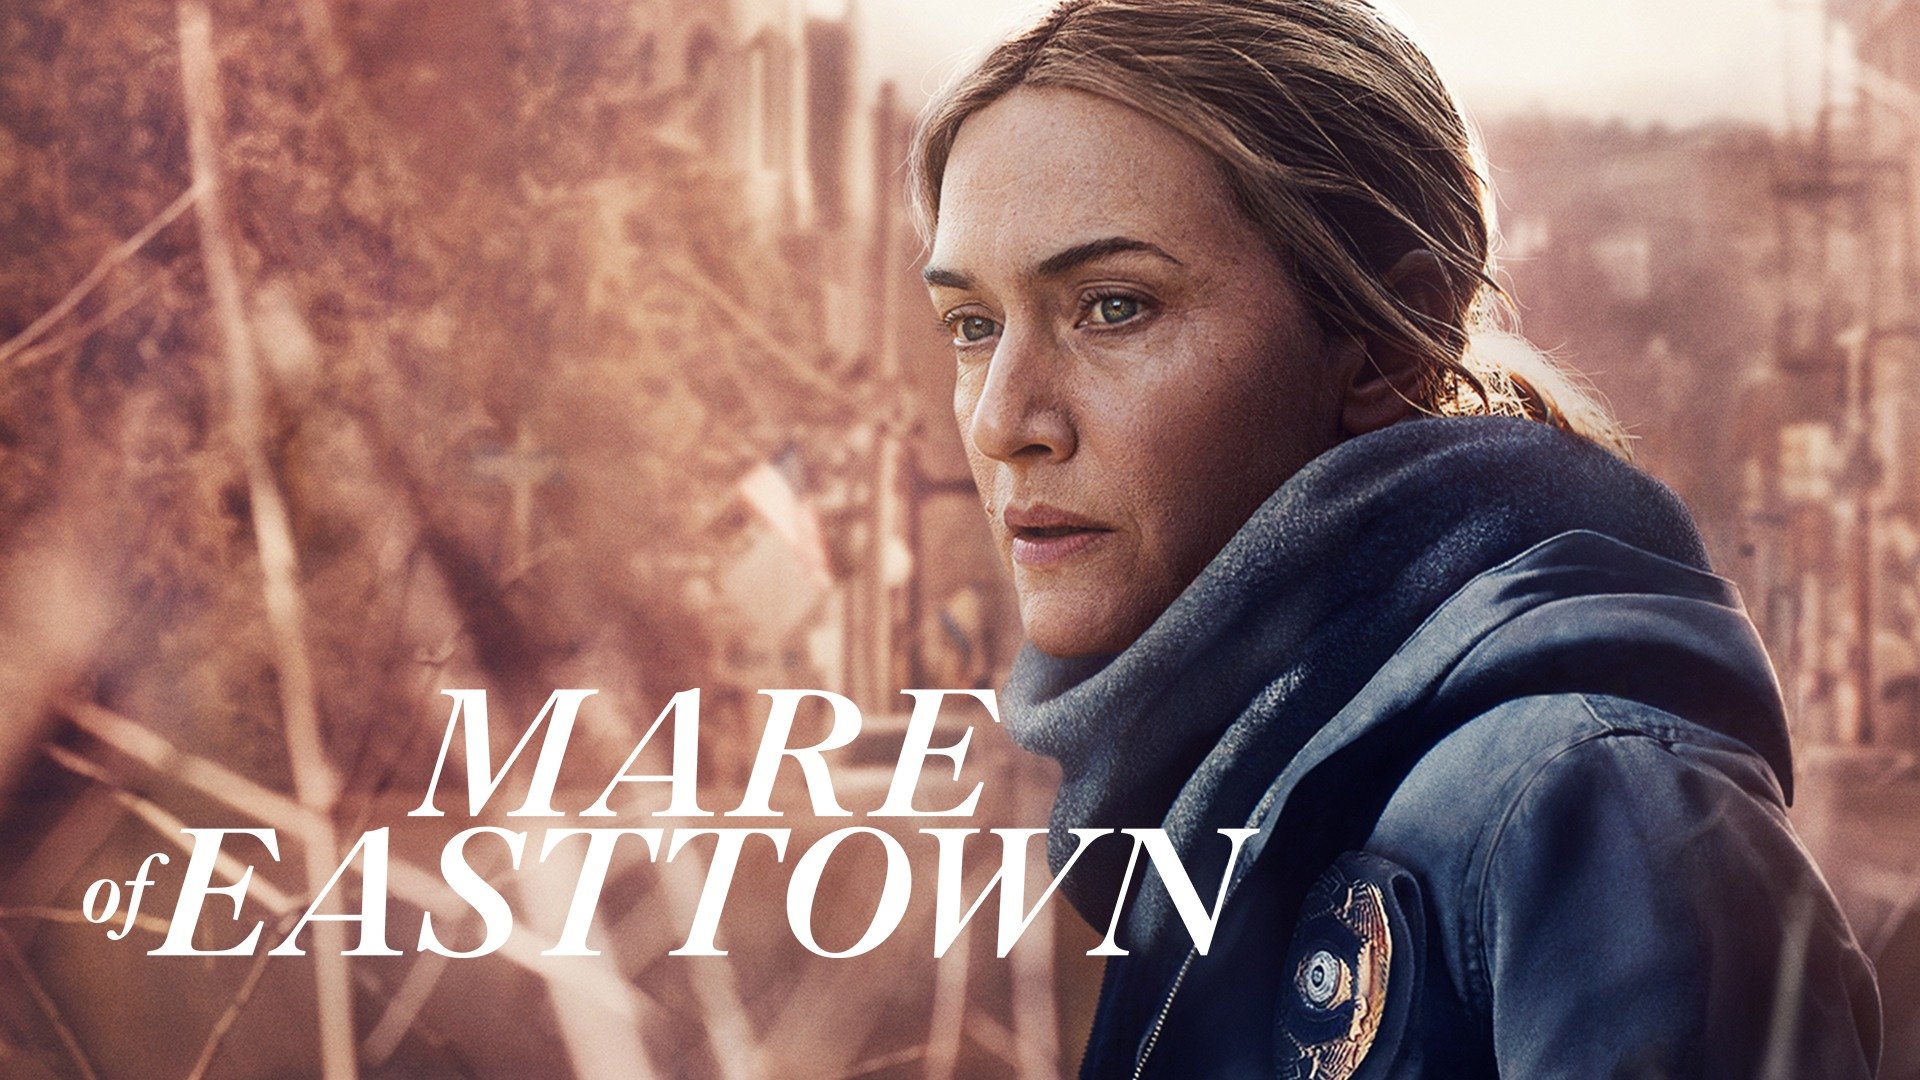 watch mare of easttown episode 6